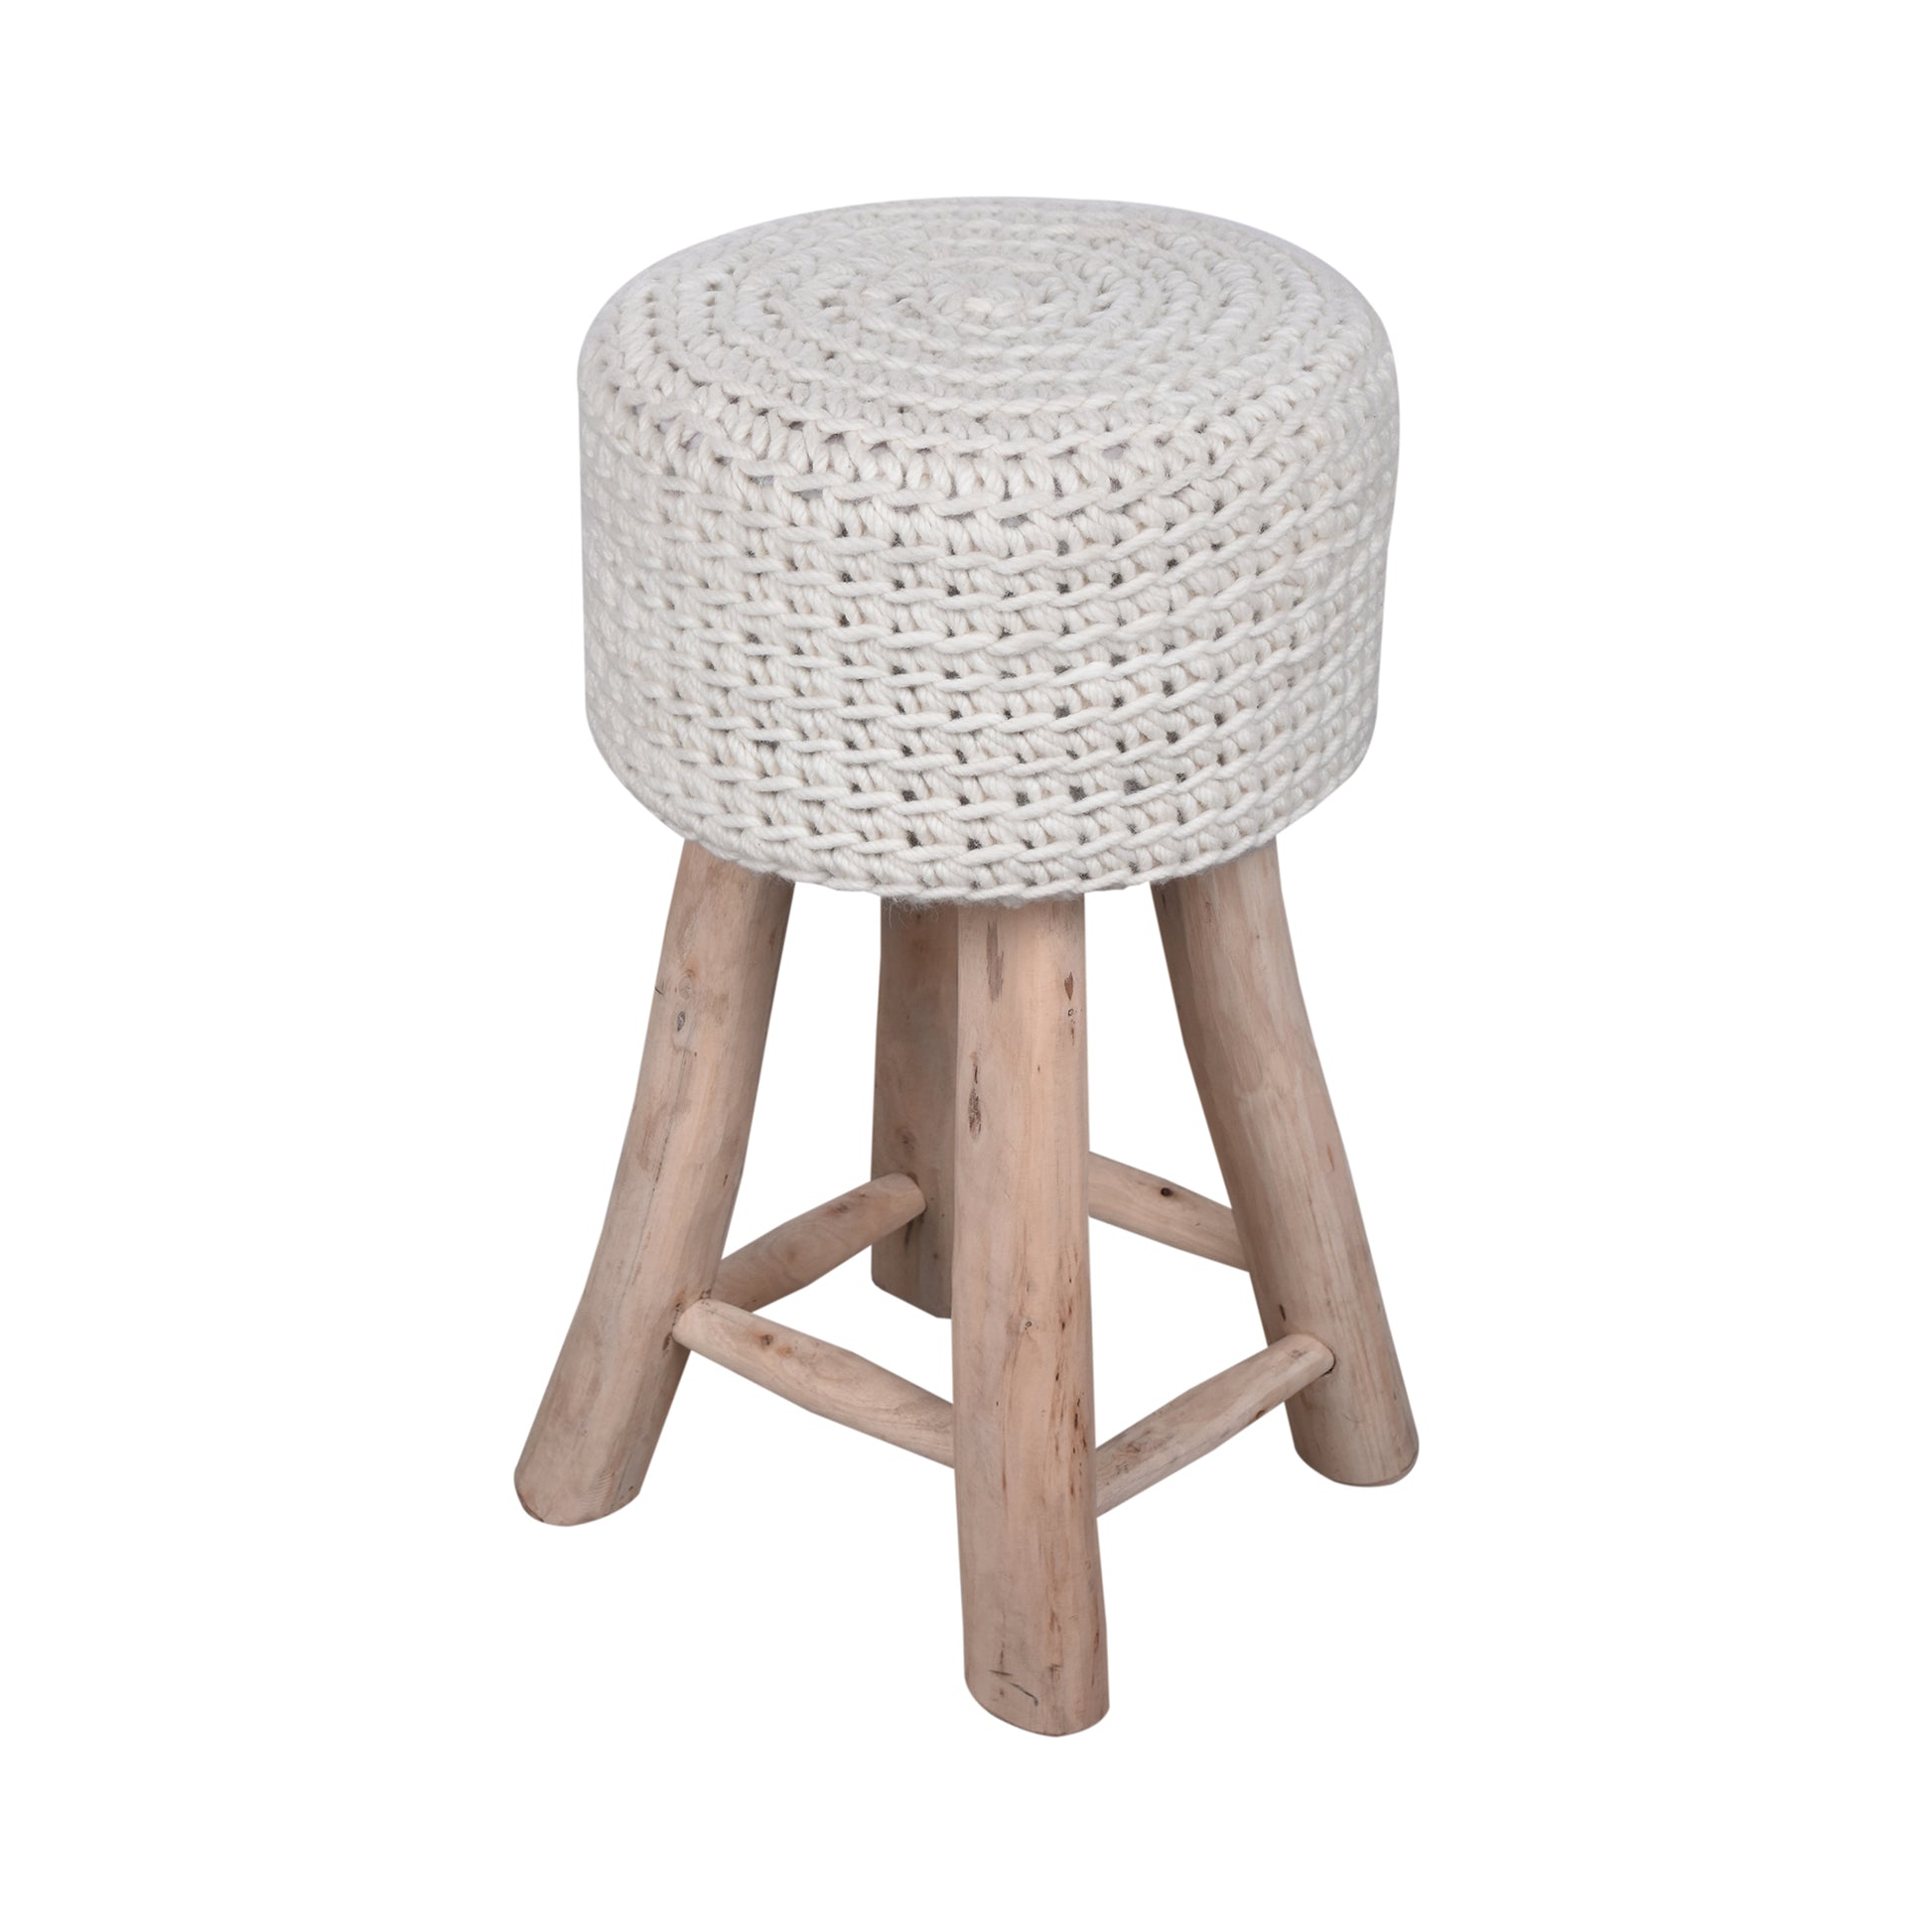 Montana Bar Stool, 40x40x70 cm, Natural White, Wool, Hand Knitted, Hm Knitted, Flat Weave